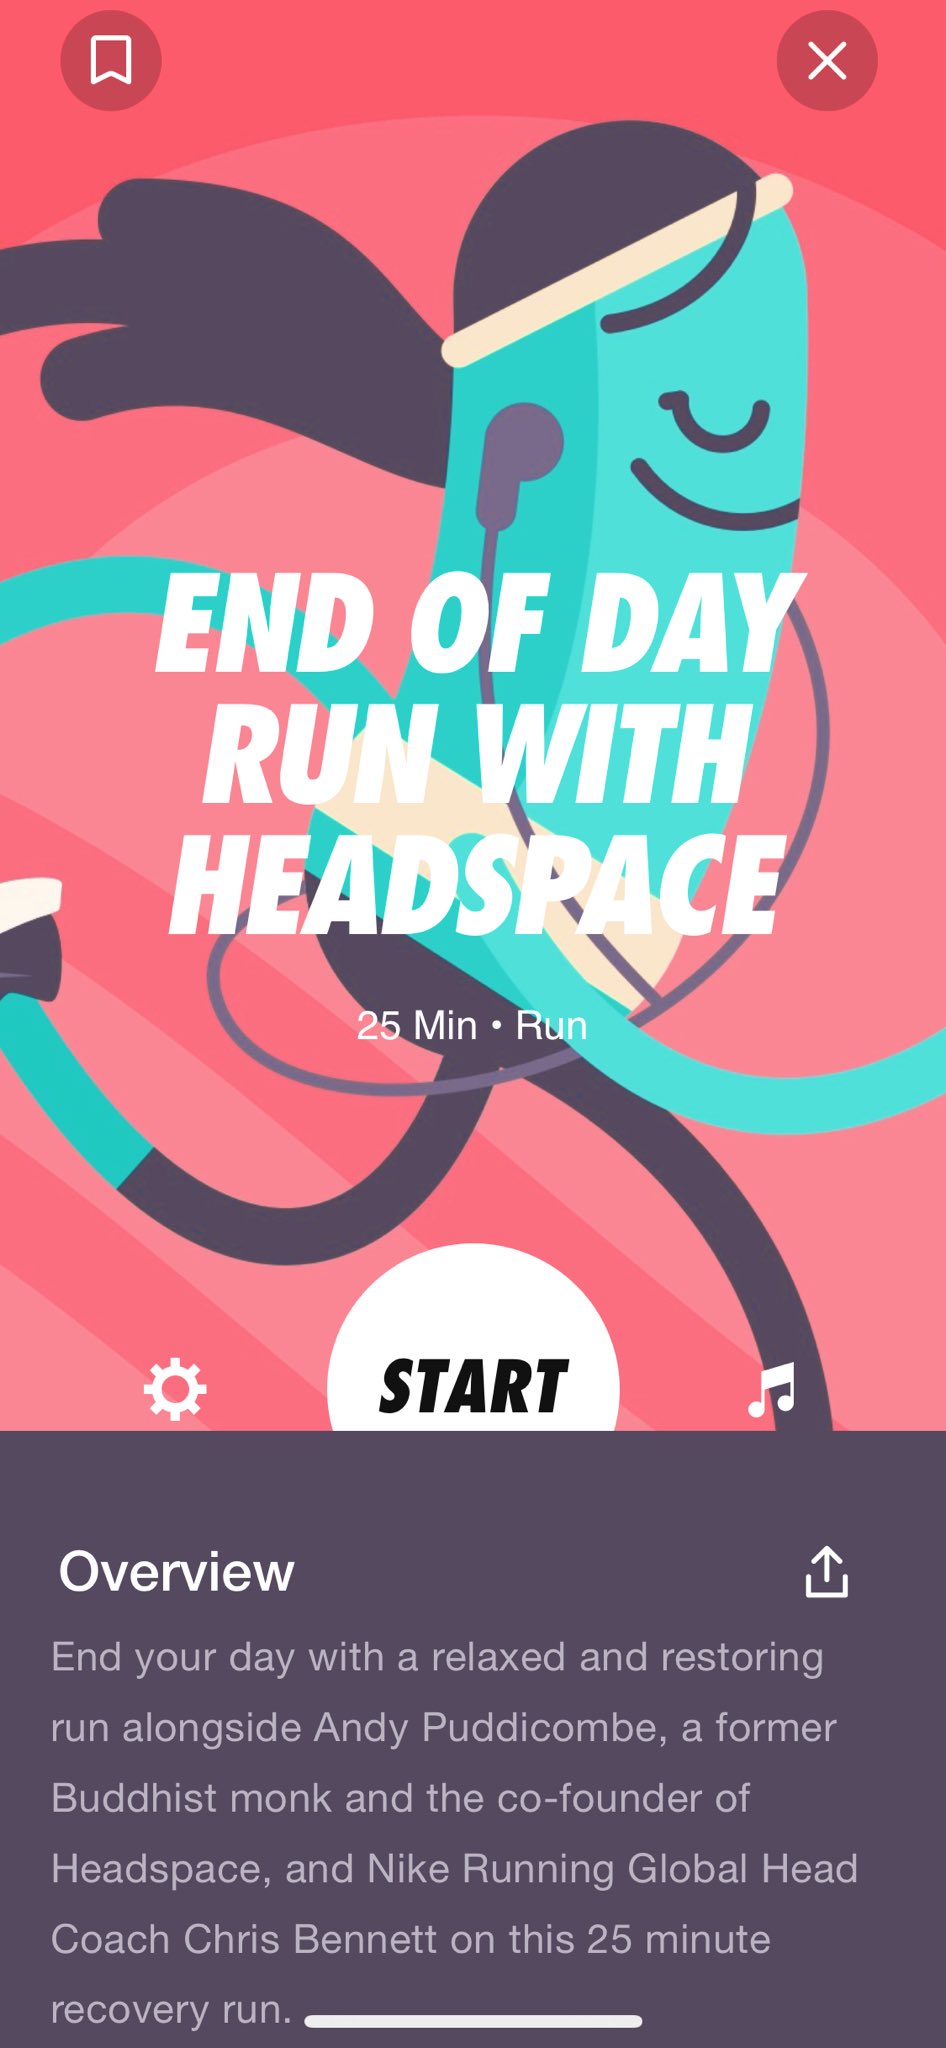 Contar Es barato cuerda Twitter-এ Del L: "@nike + @Headspace collaboration remains undefeated .  #MindfulMoments “Life is short. We can live it lost in thought or we can  choose to be present as life unfolds around